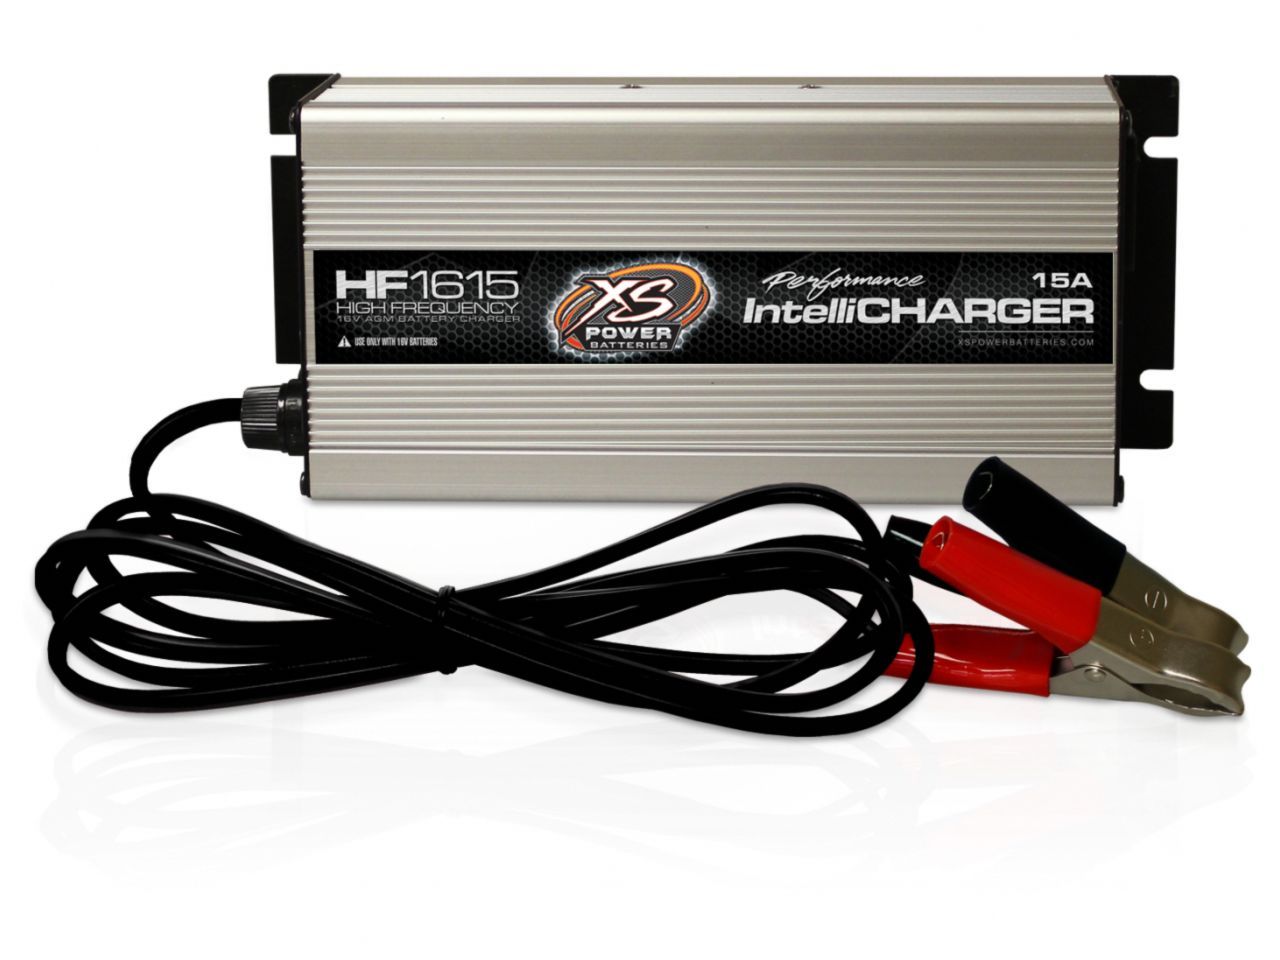 XS Power Battery Charger HF1615 Item Image